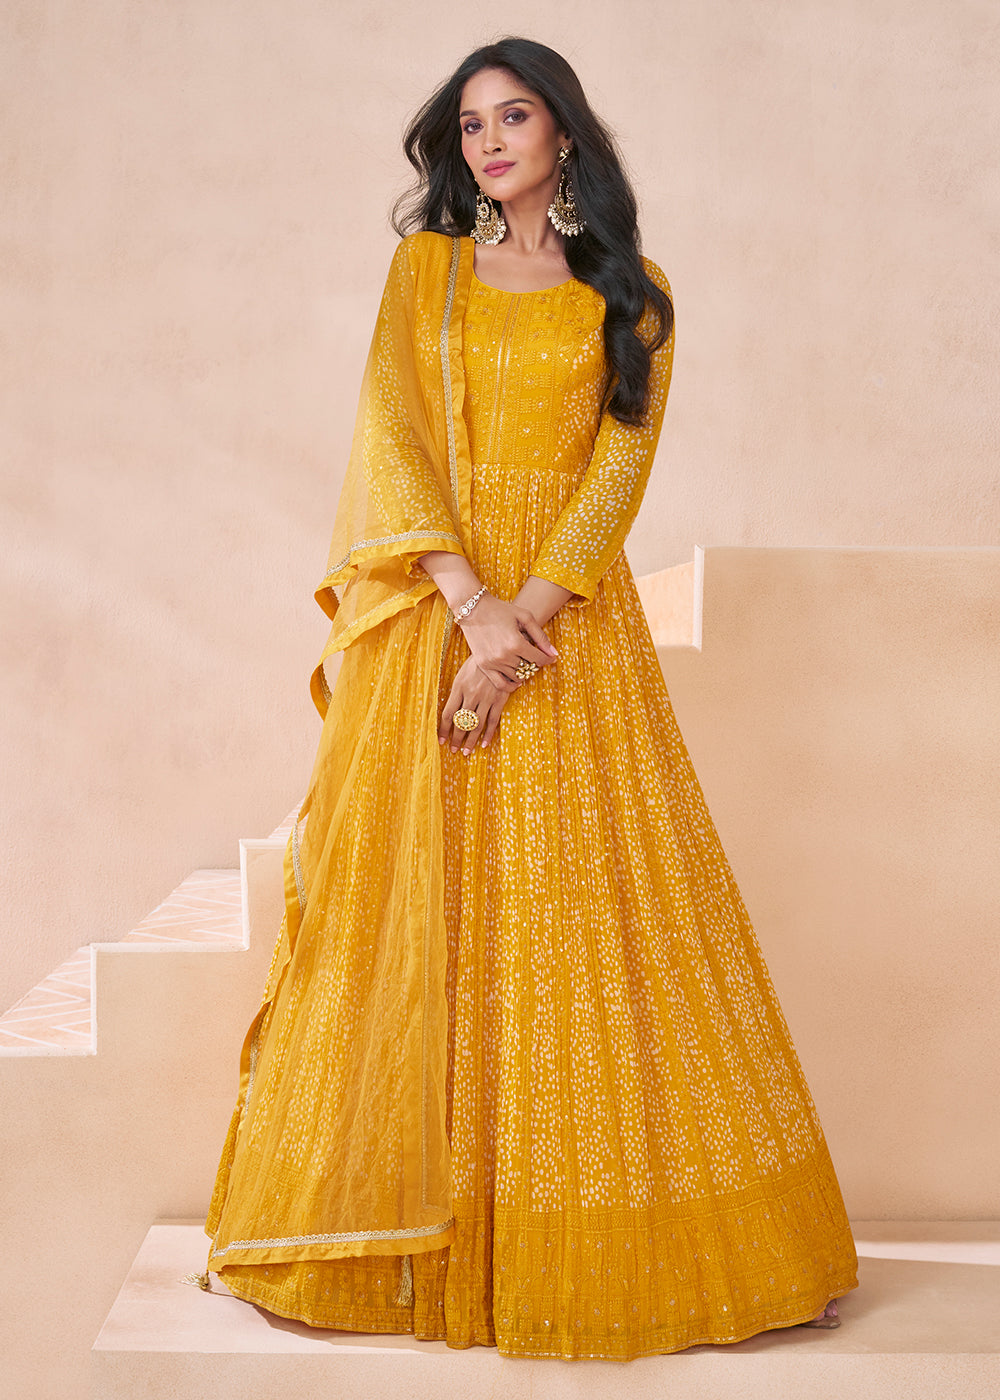 Buy Now Wedding Yellow Real Georgette Embroidered Anarkali Gown Online in USA, UK, Australia, New Zealand, Canada & Worldwide at Empress Clothing.